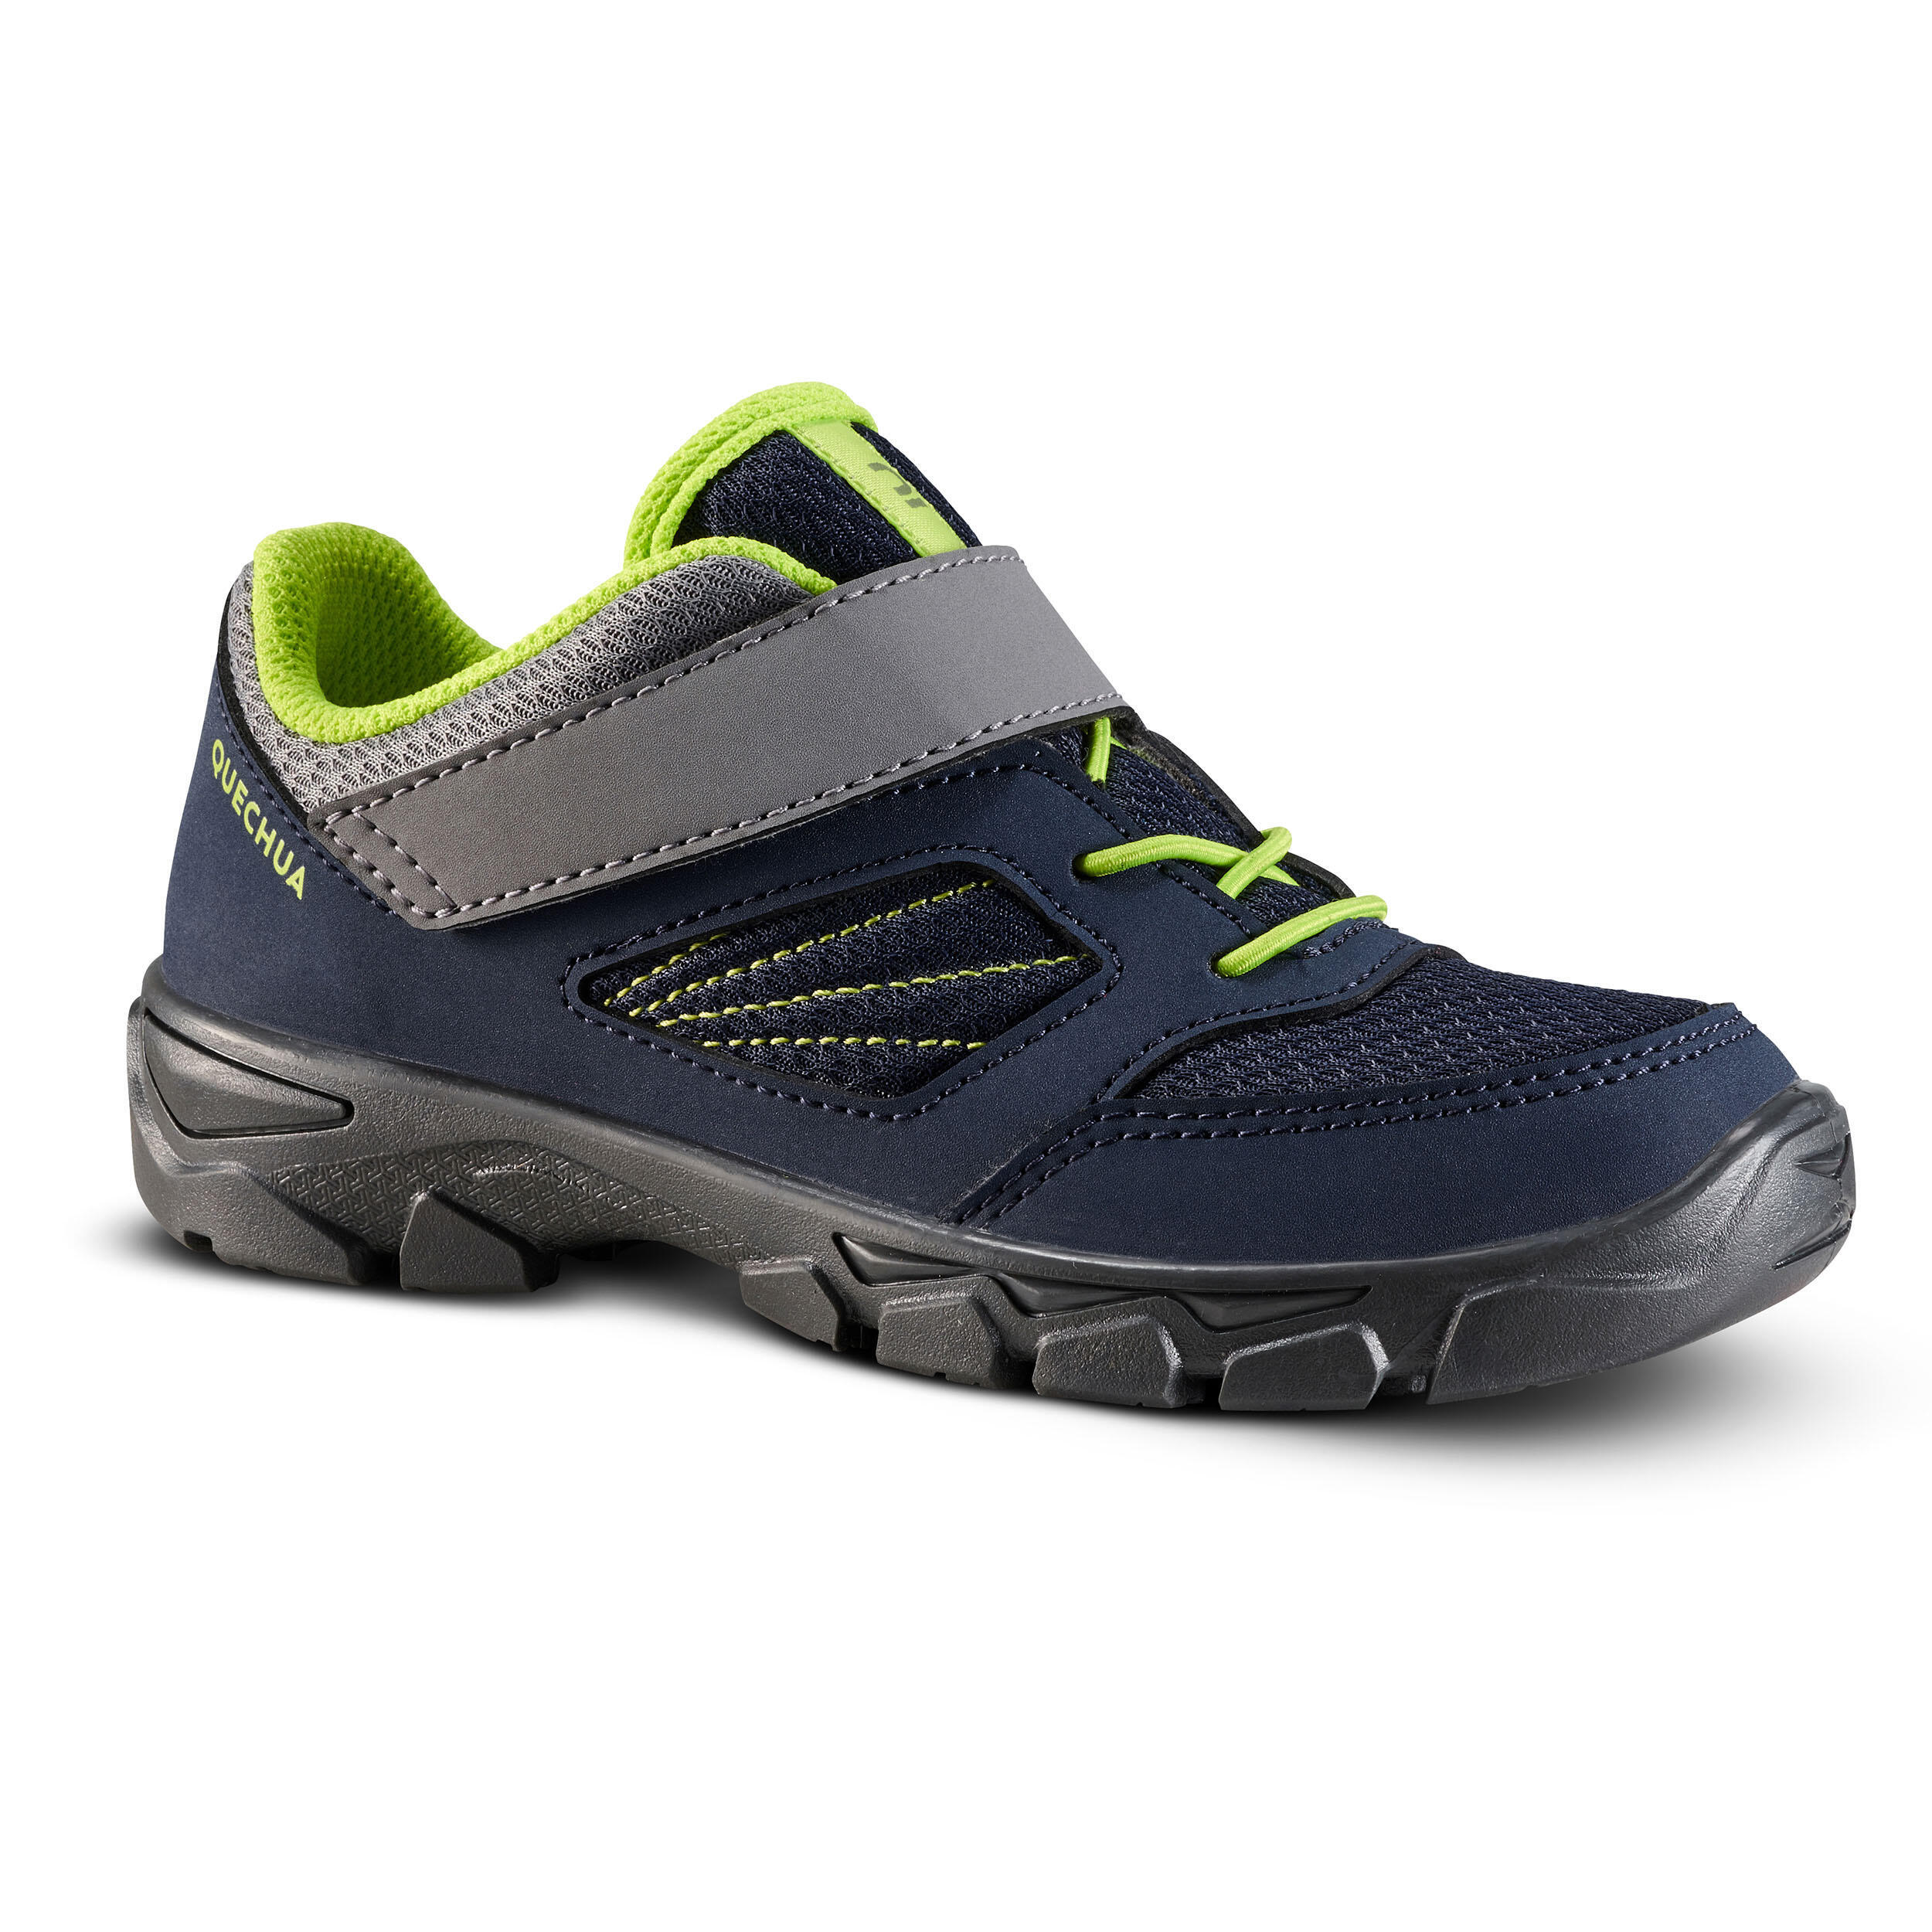 QUECHUA Children's Hiking Low Lace-up Shoes MH100 - 6.5C to 1.5 - Blue